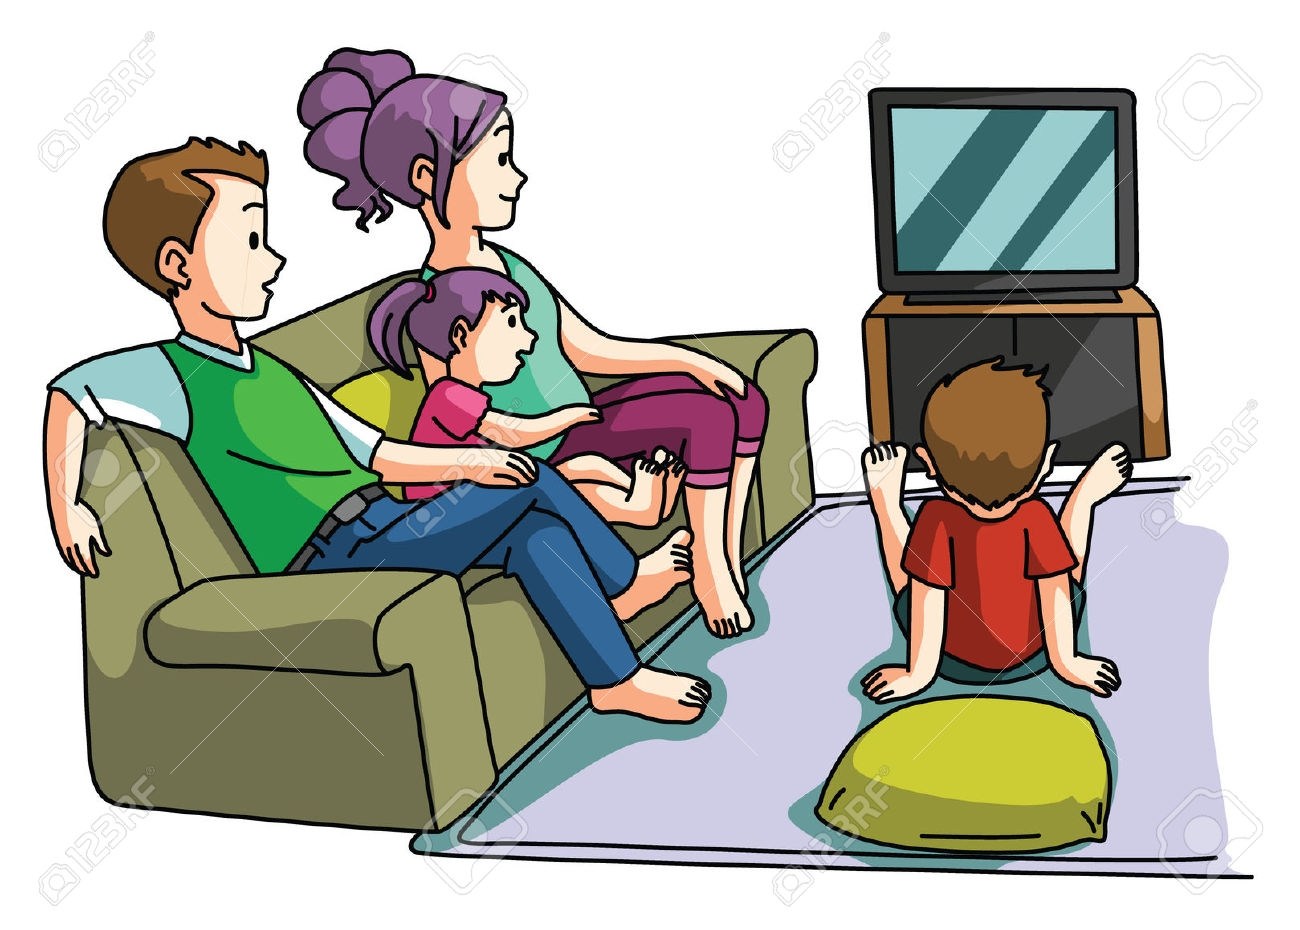 Family watching movie clipart 5 » Clipart Portal.